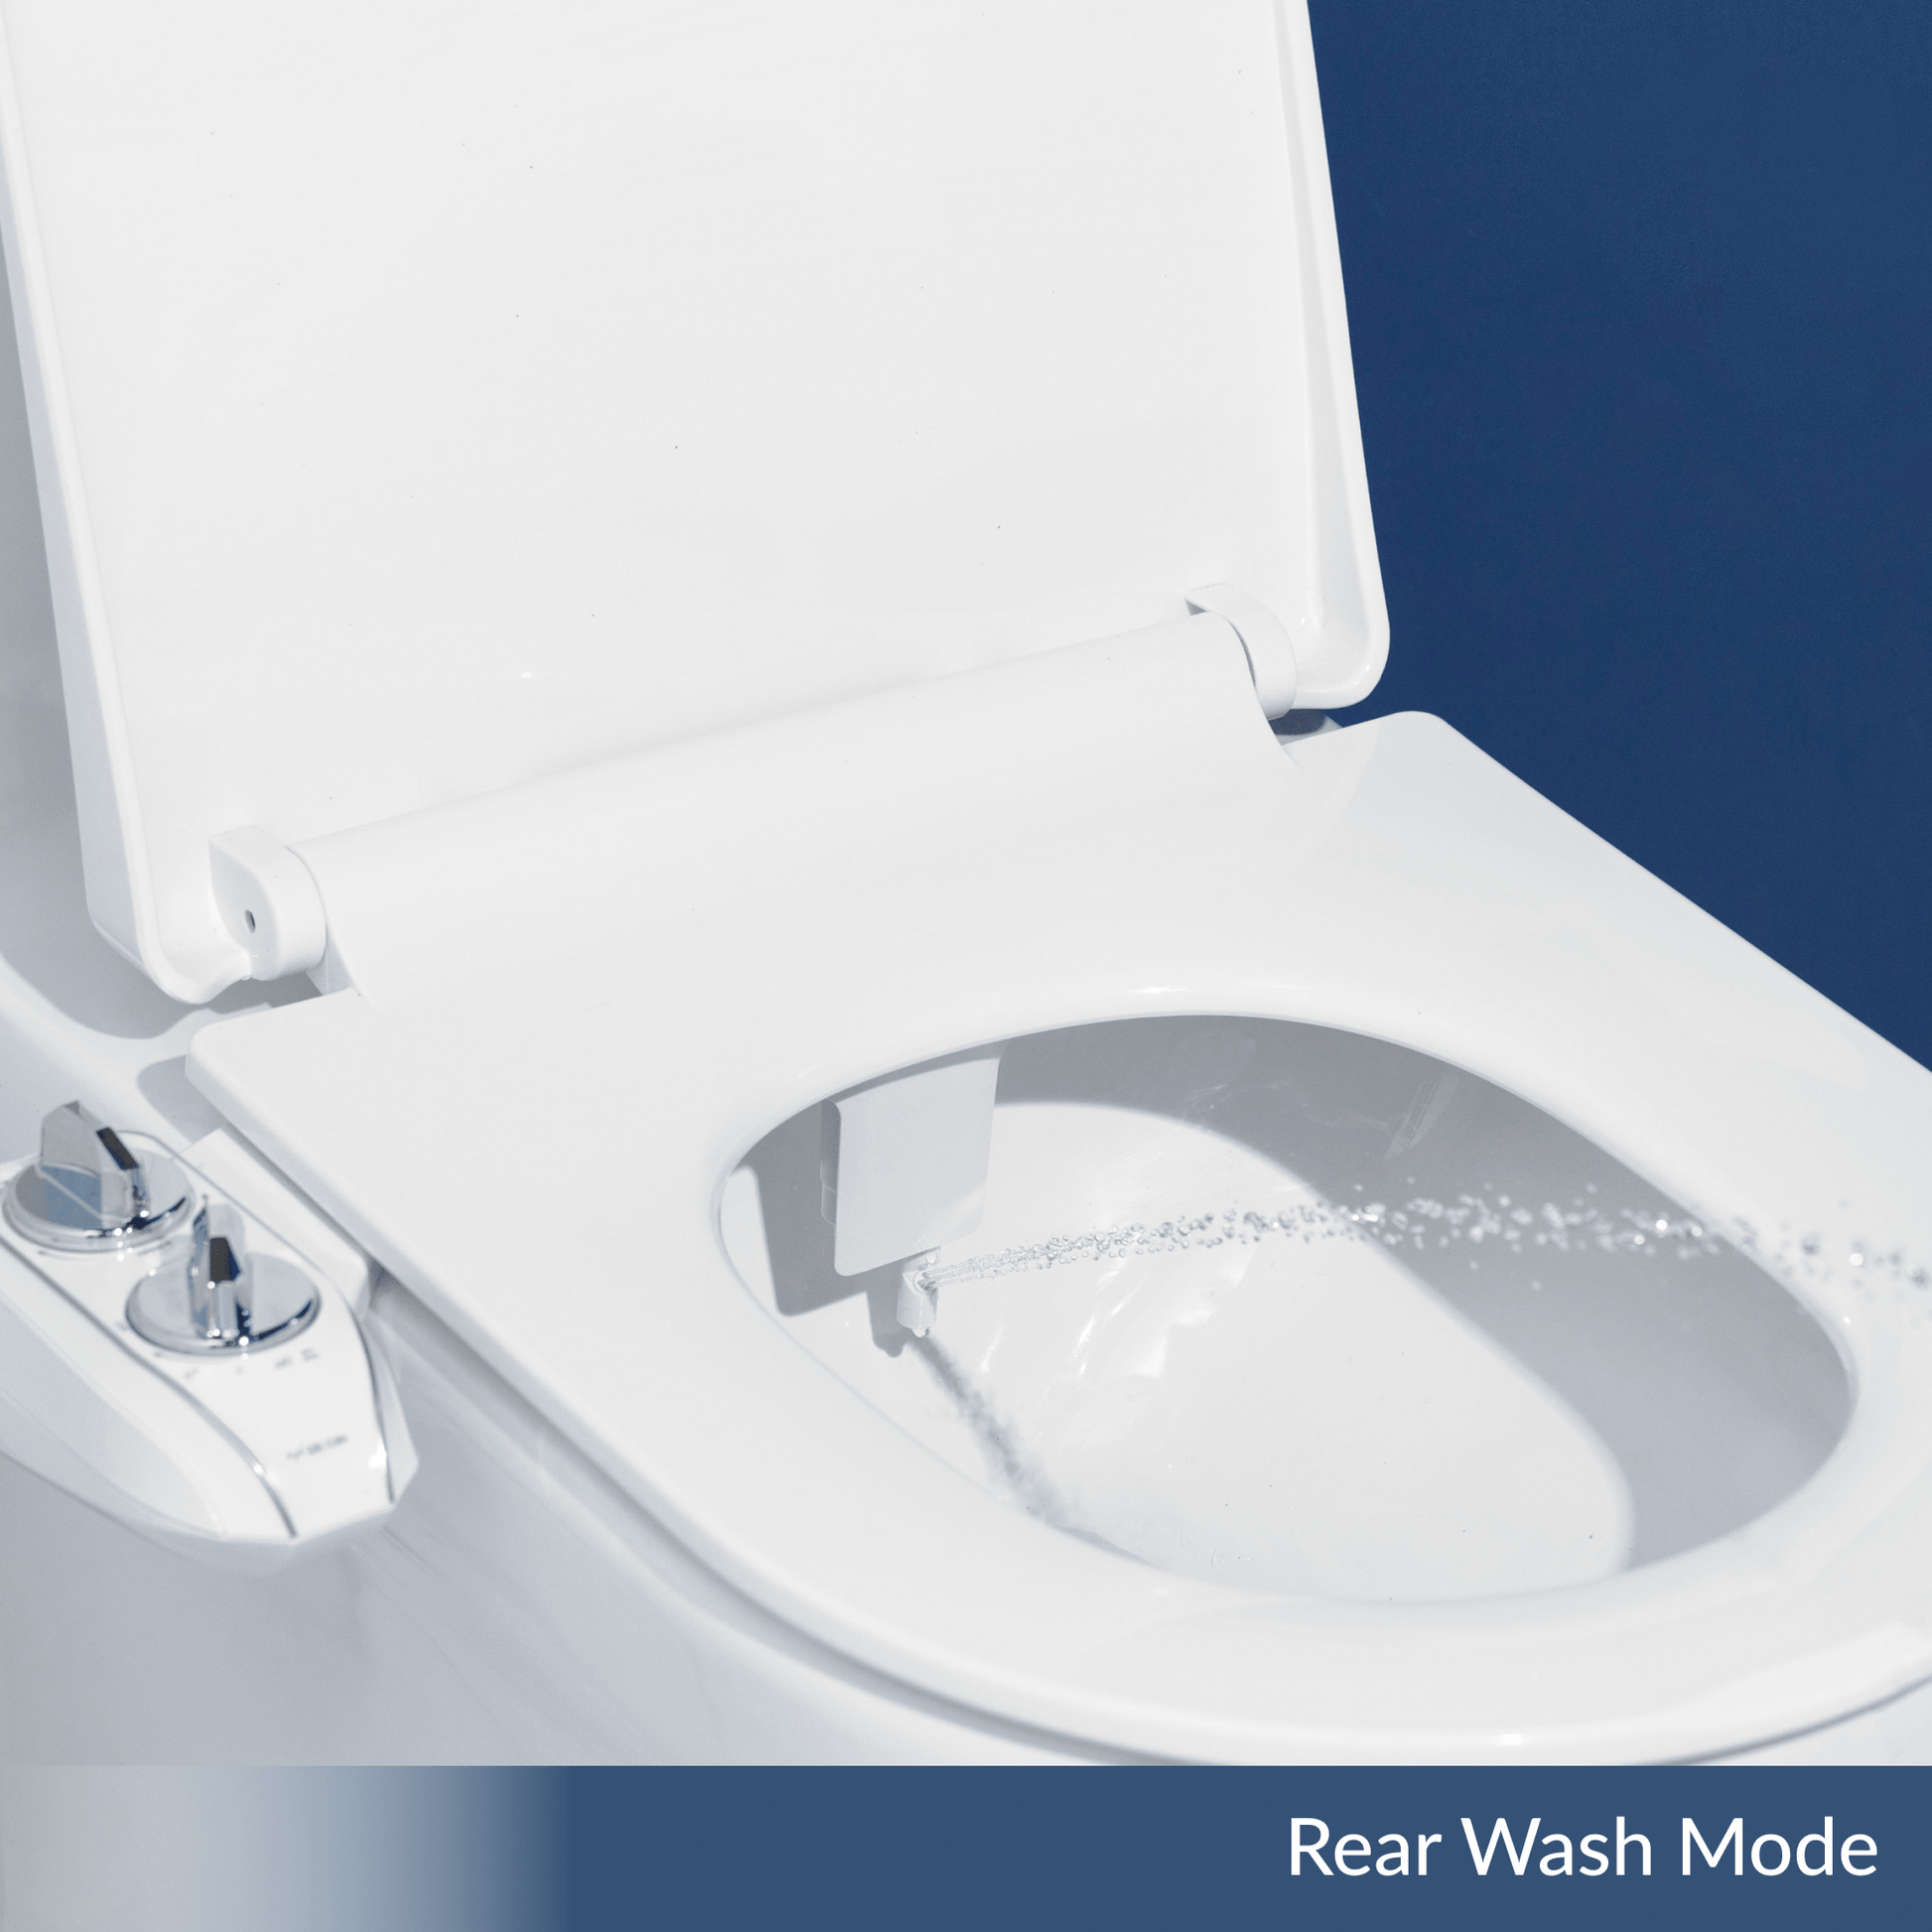 Use the Rear Wash Mode to activate a bidet spray from the rear wash nozzle